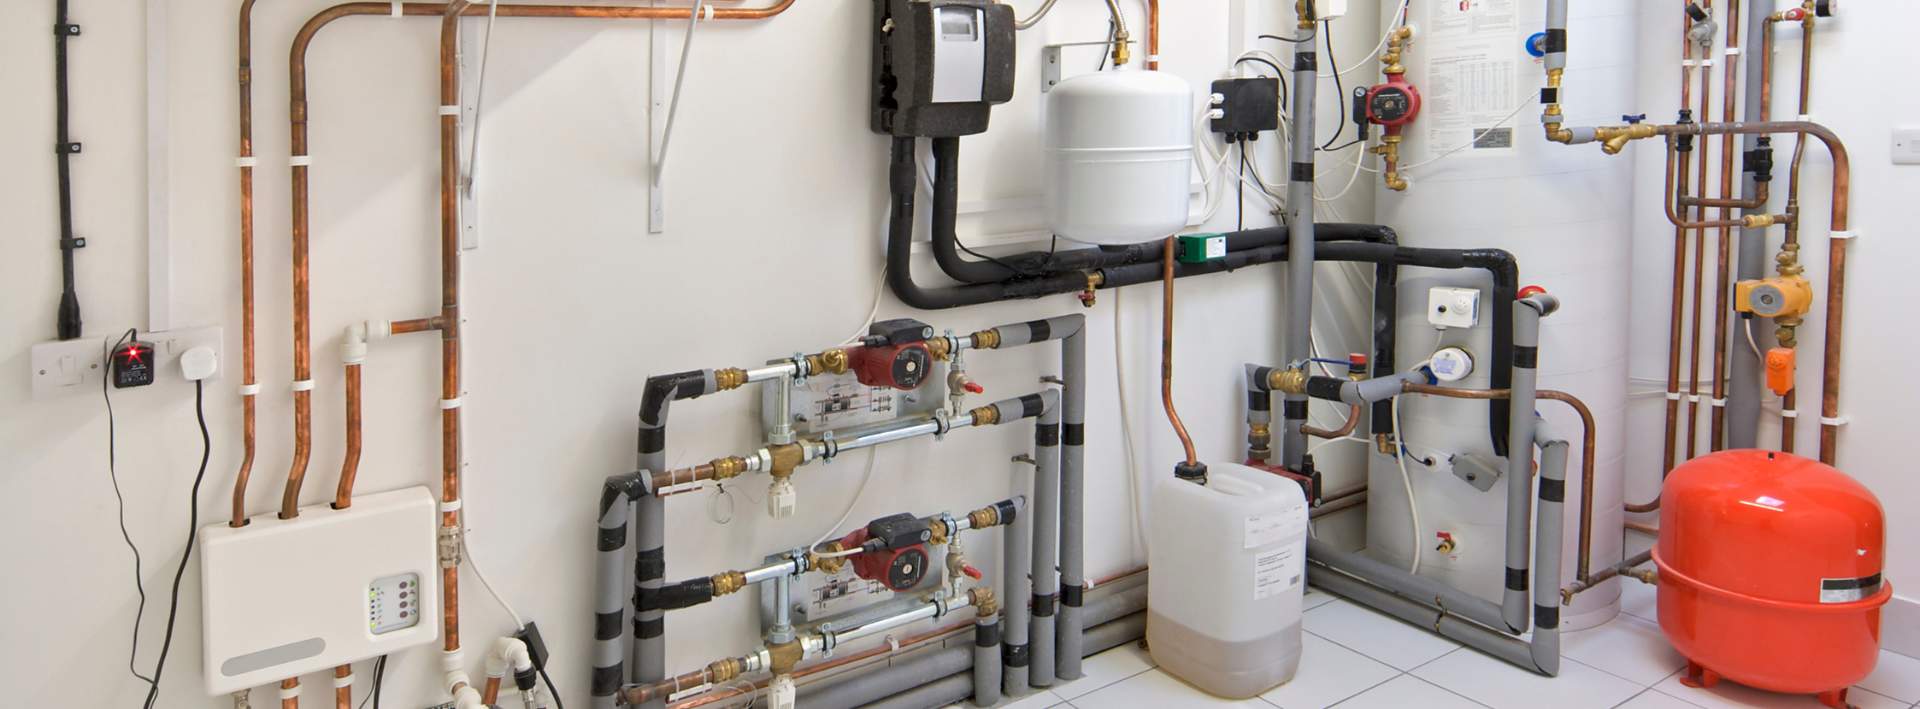 Investing in a heating system